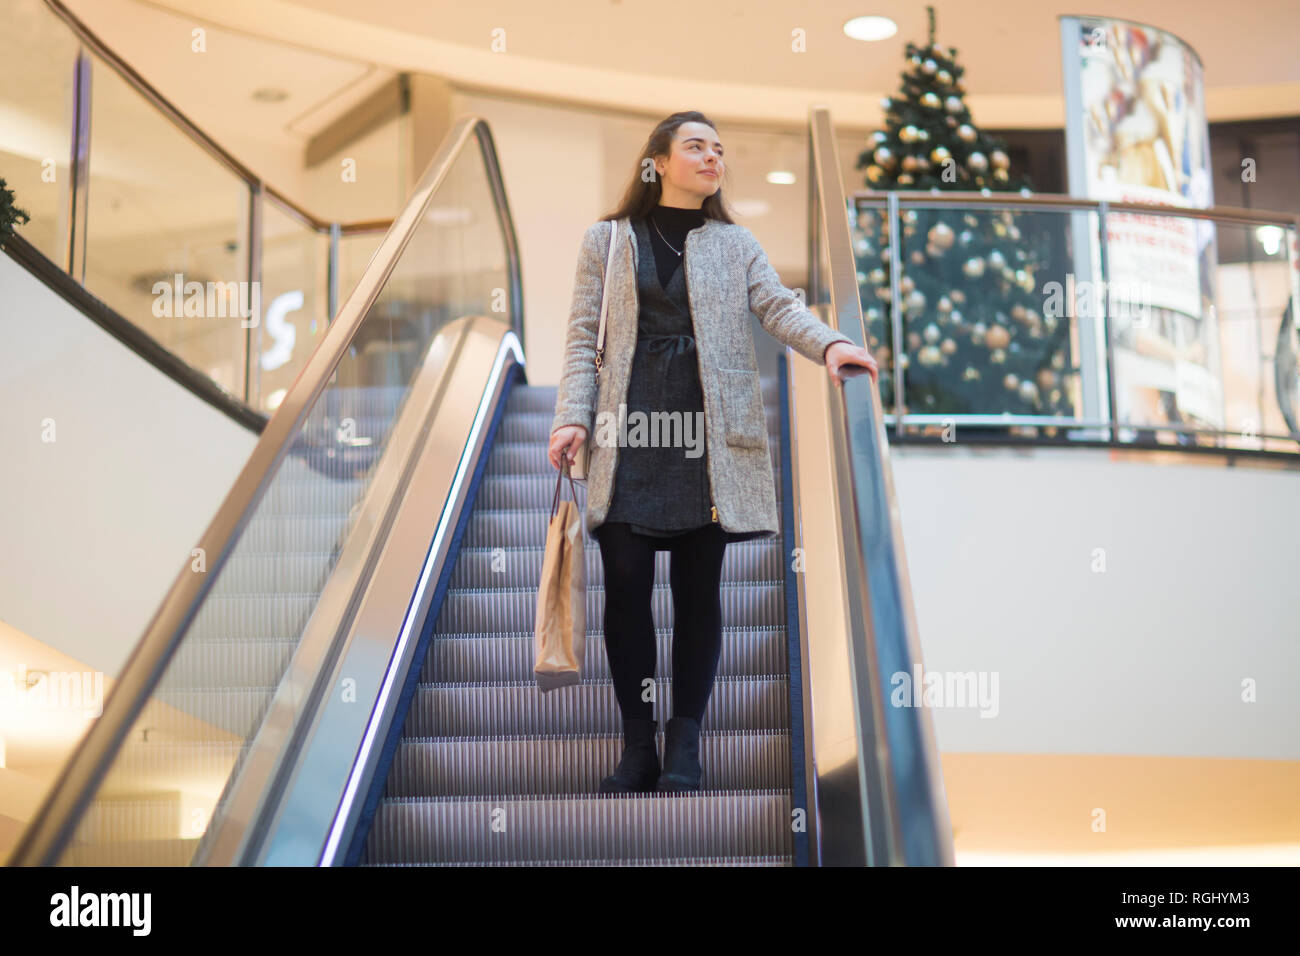 Young woman with shopping bag standing on escalator in a shopping mall at Christmas time Stock Photo